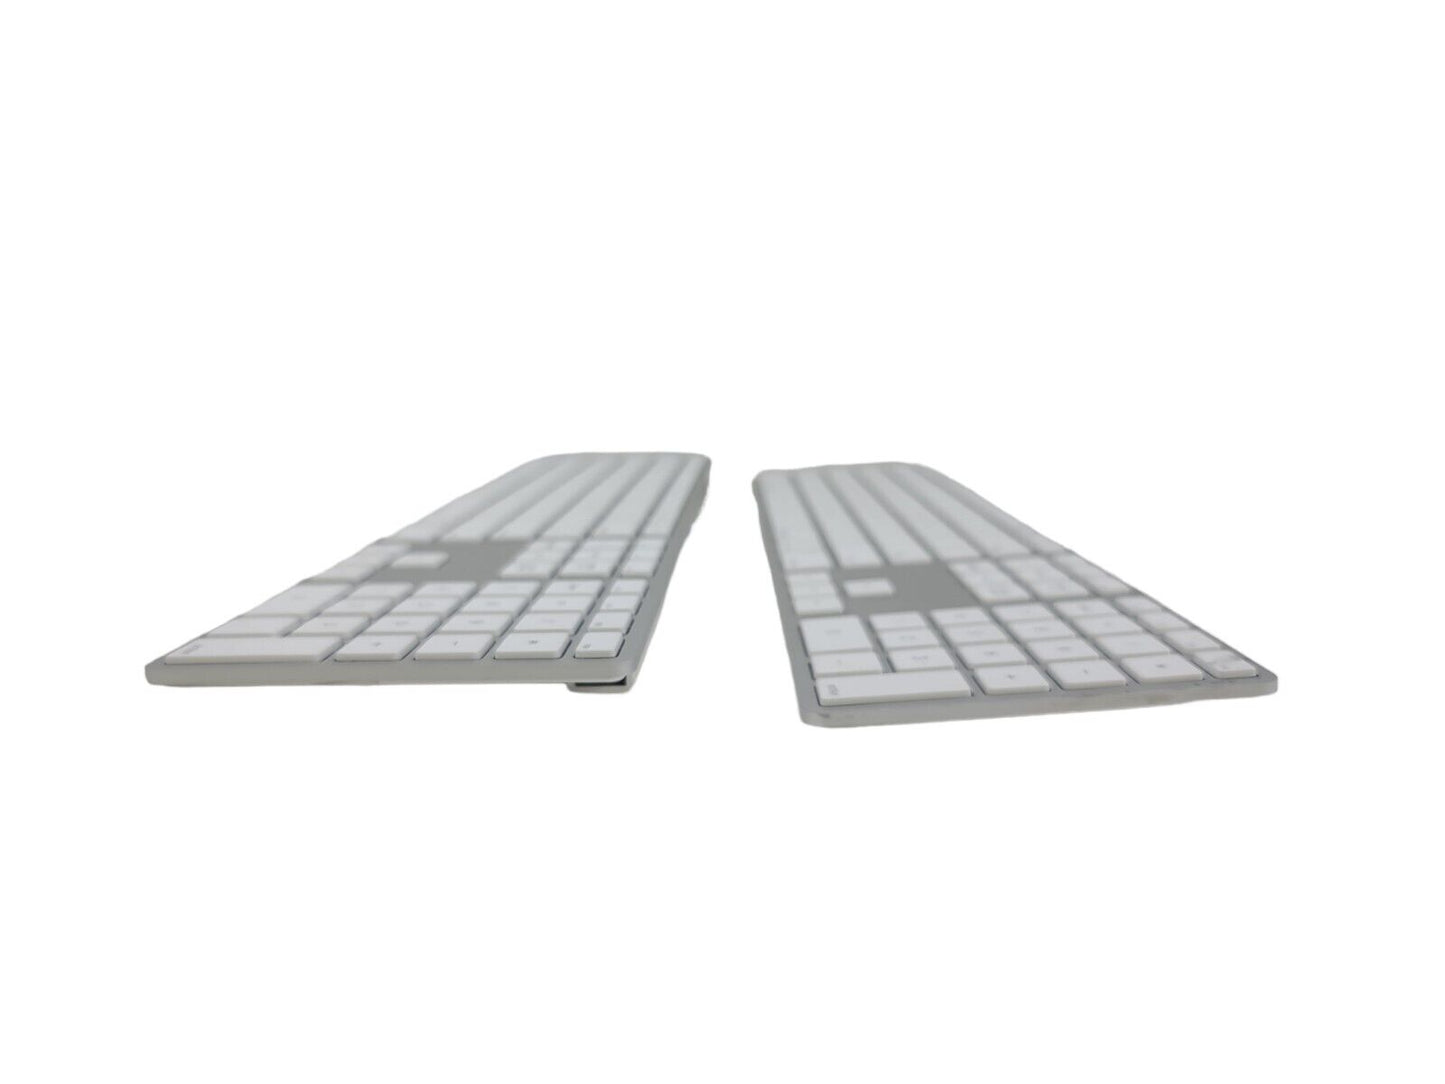 Lot of 2 Original Apple A1243 White/Aluminum USB Wired Standard Keyboard